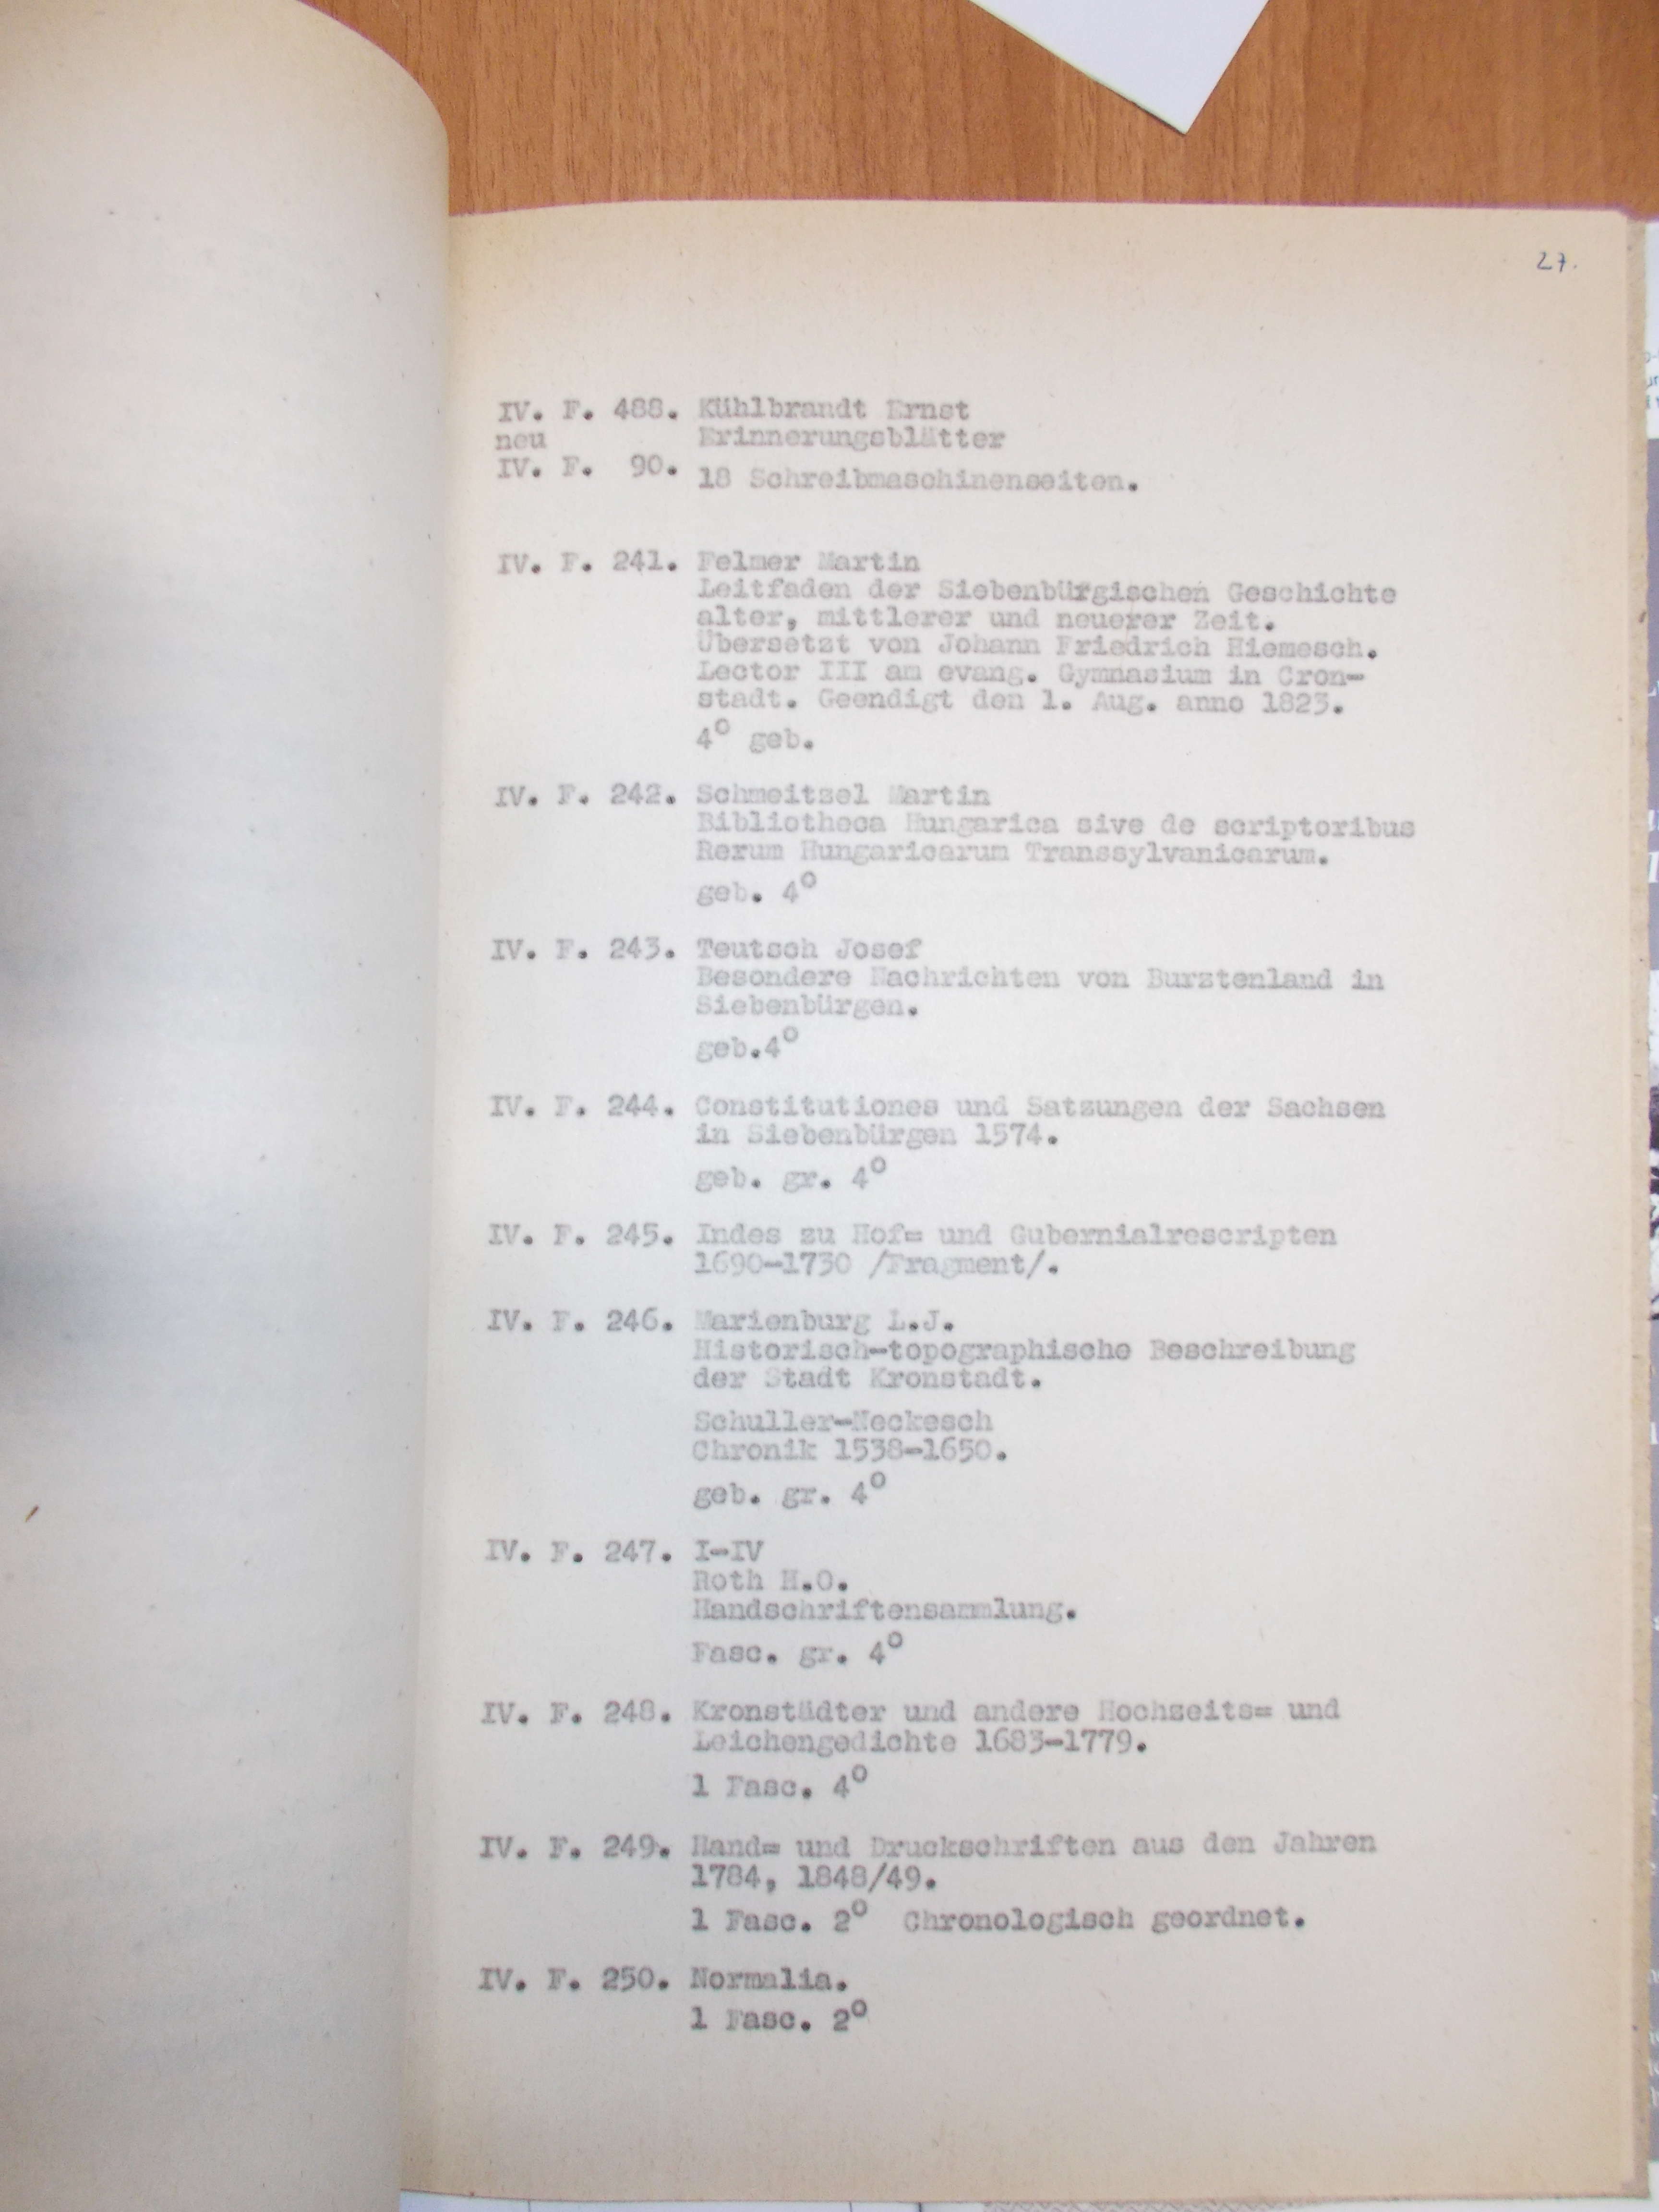 Excerpt from the catalog of the fonds in the custody of Black Church Archives and Library